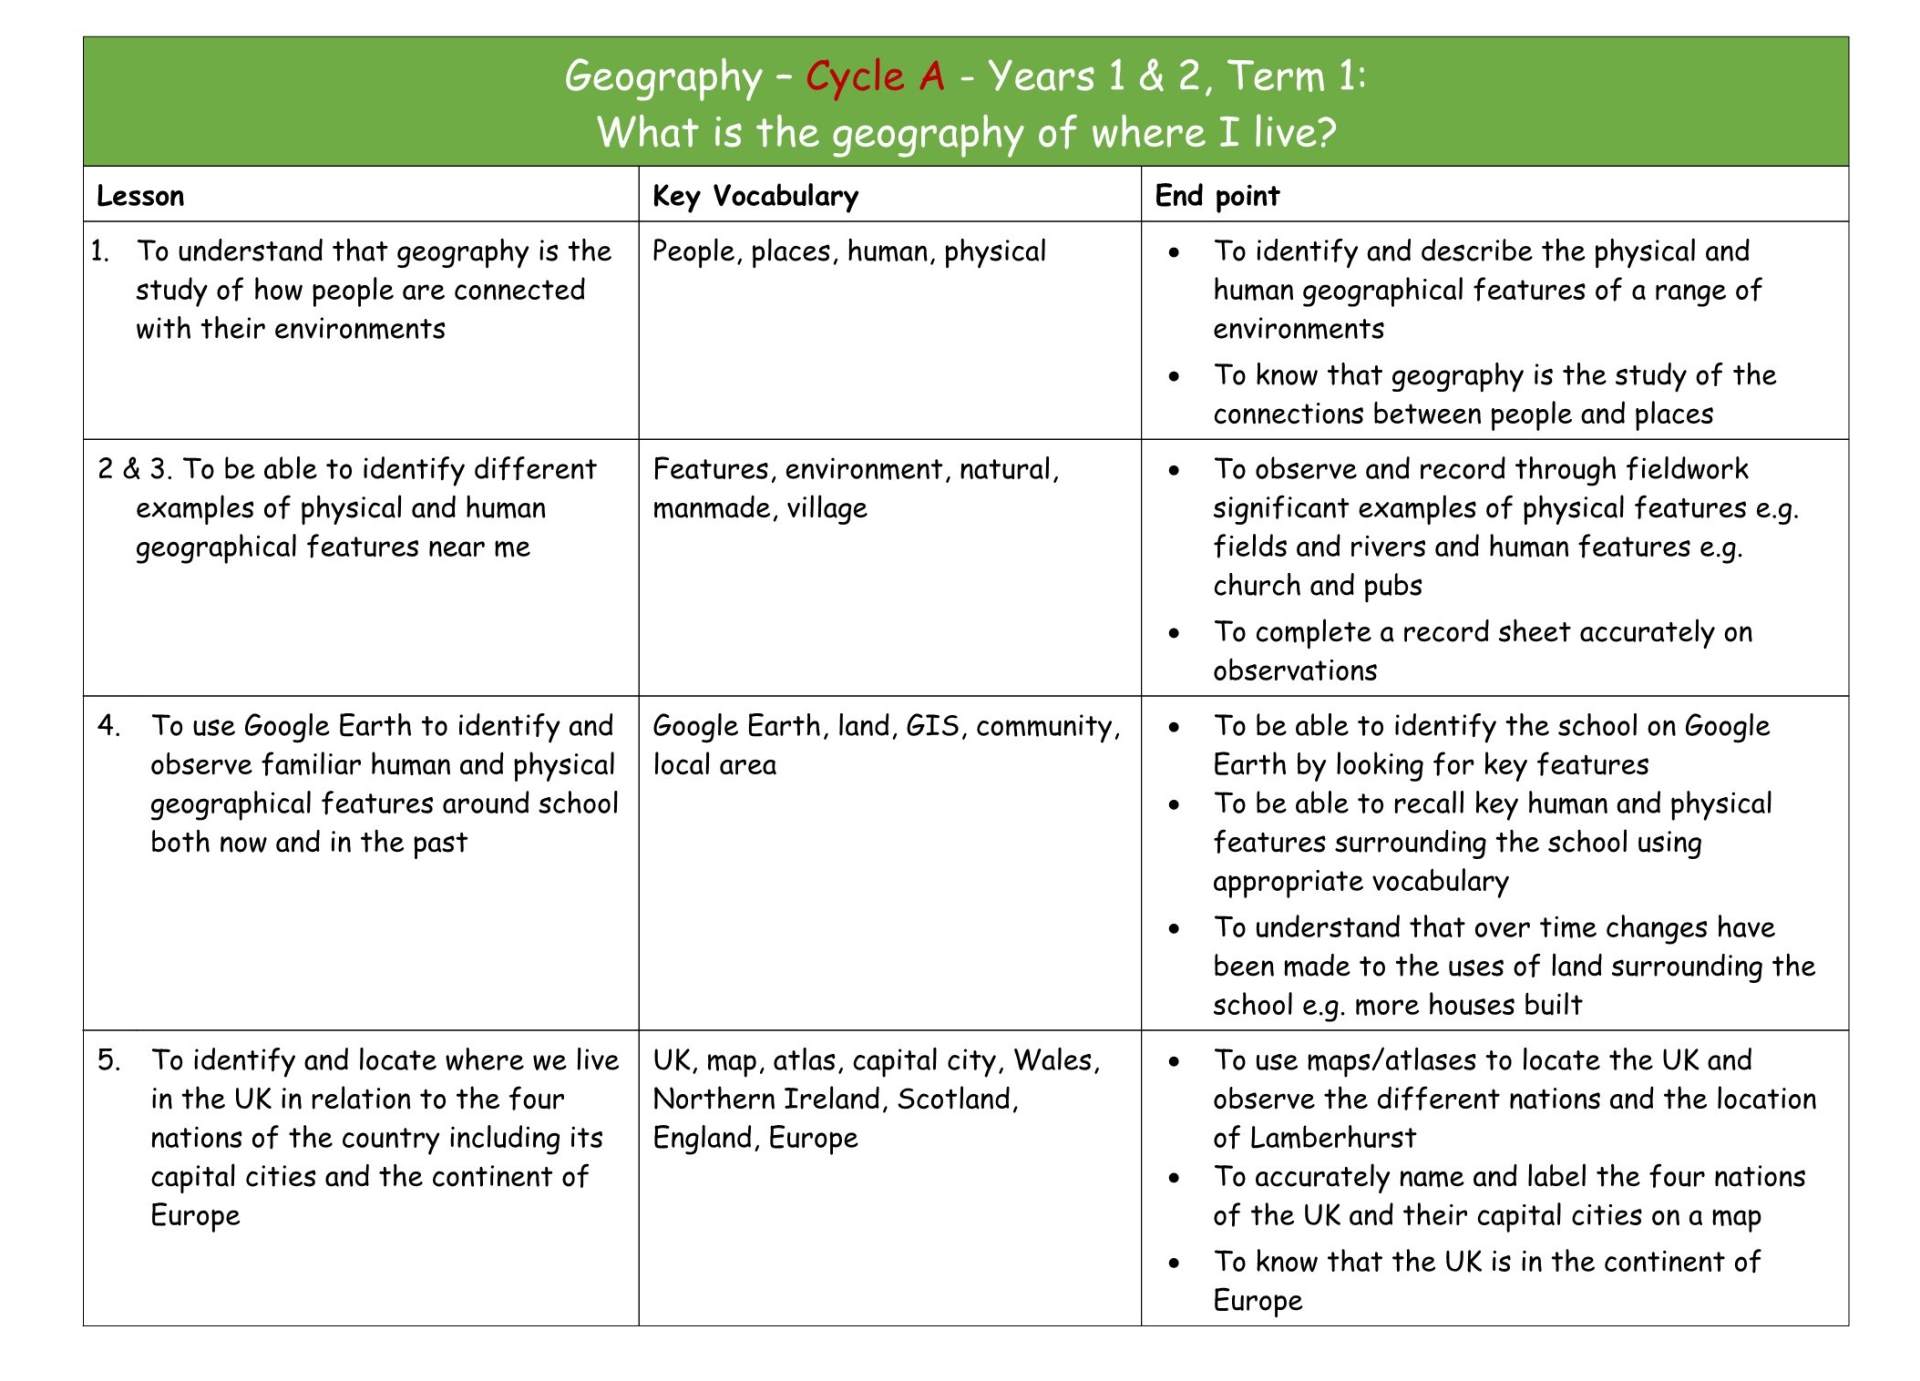 Geography Y1&2 Cycle A MTP T1